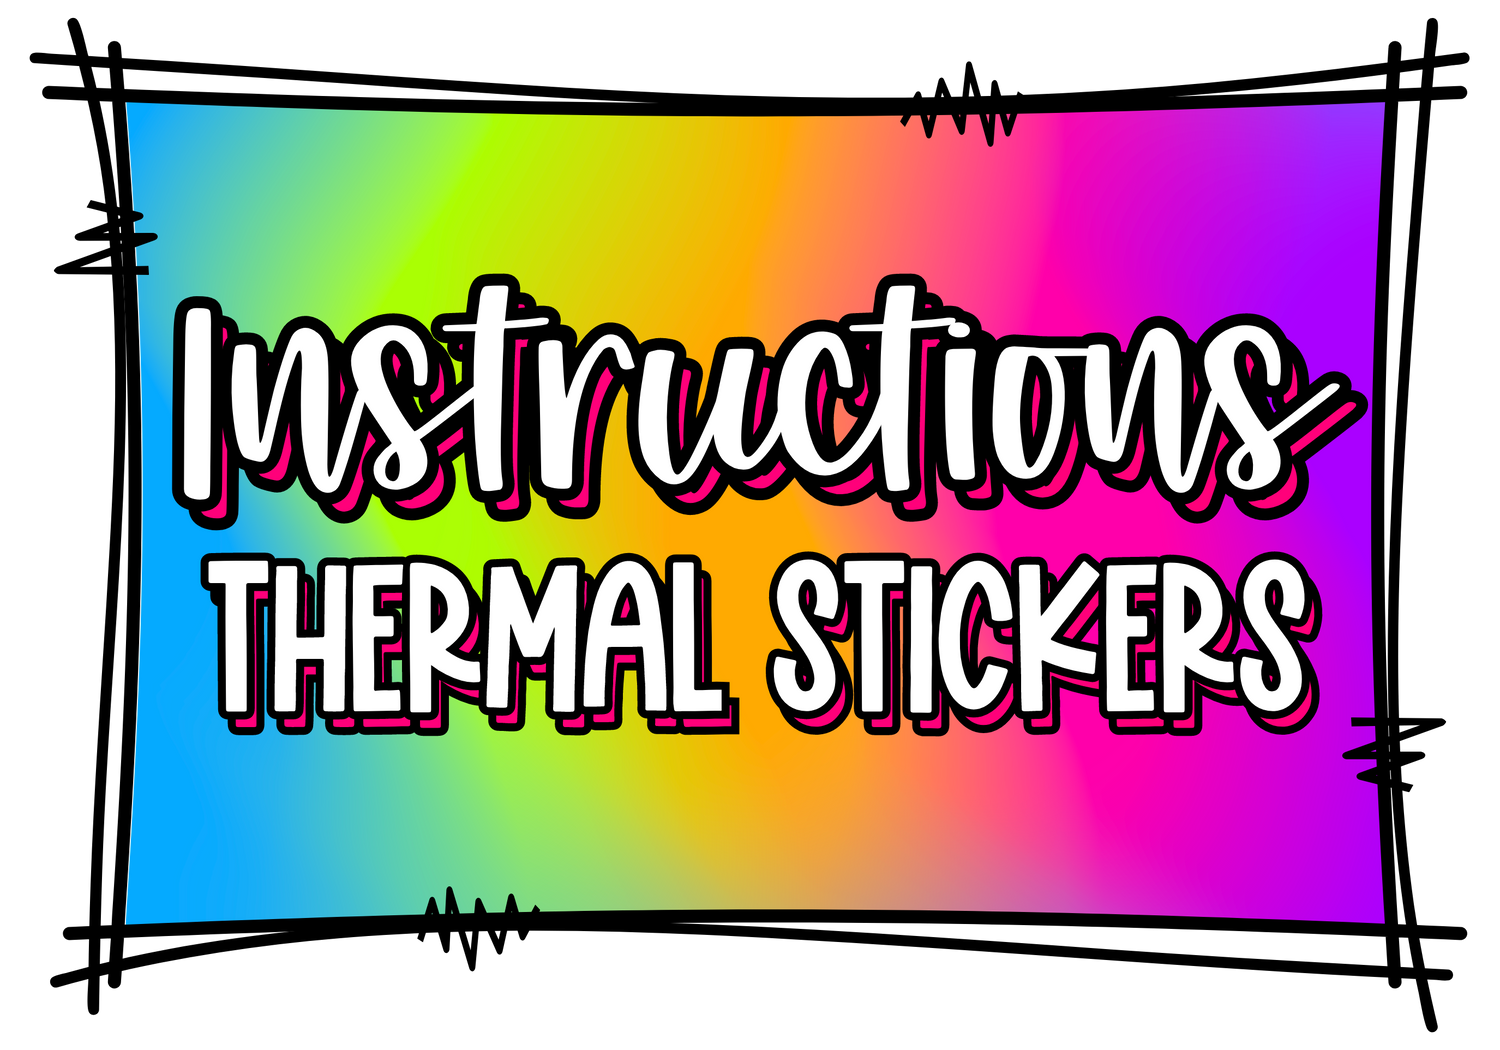 Instructions Small Business Thermal Stickers